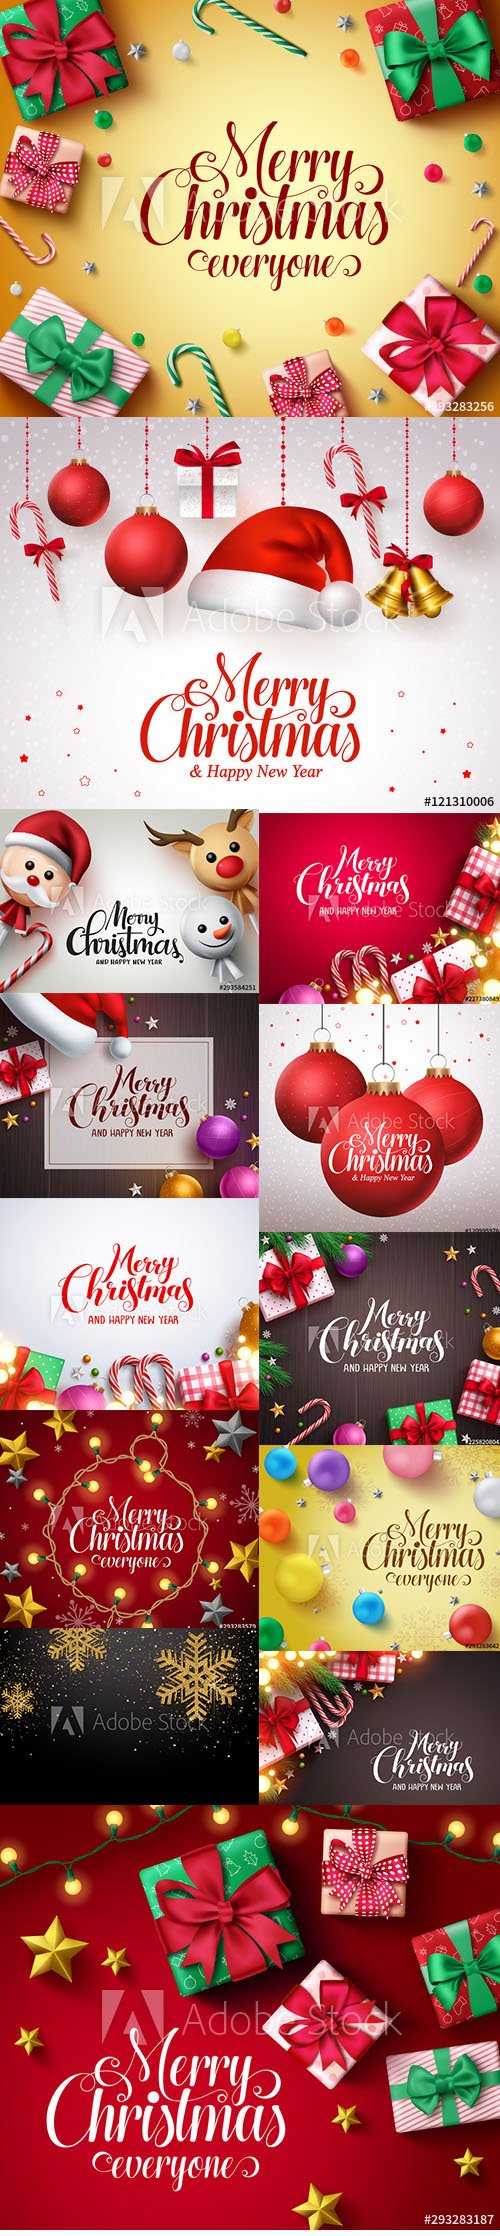 Merry Christmas and Happy New Year Backgrounds Template with Decor vol2